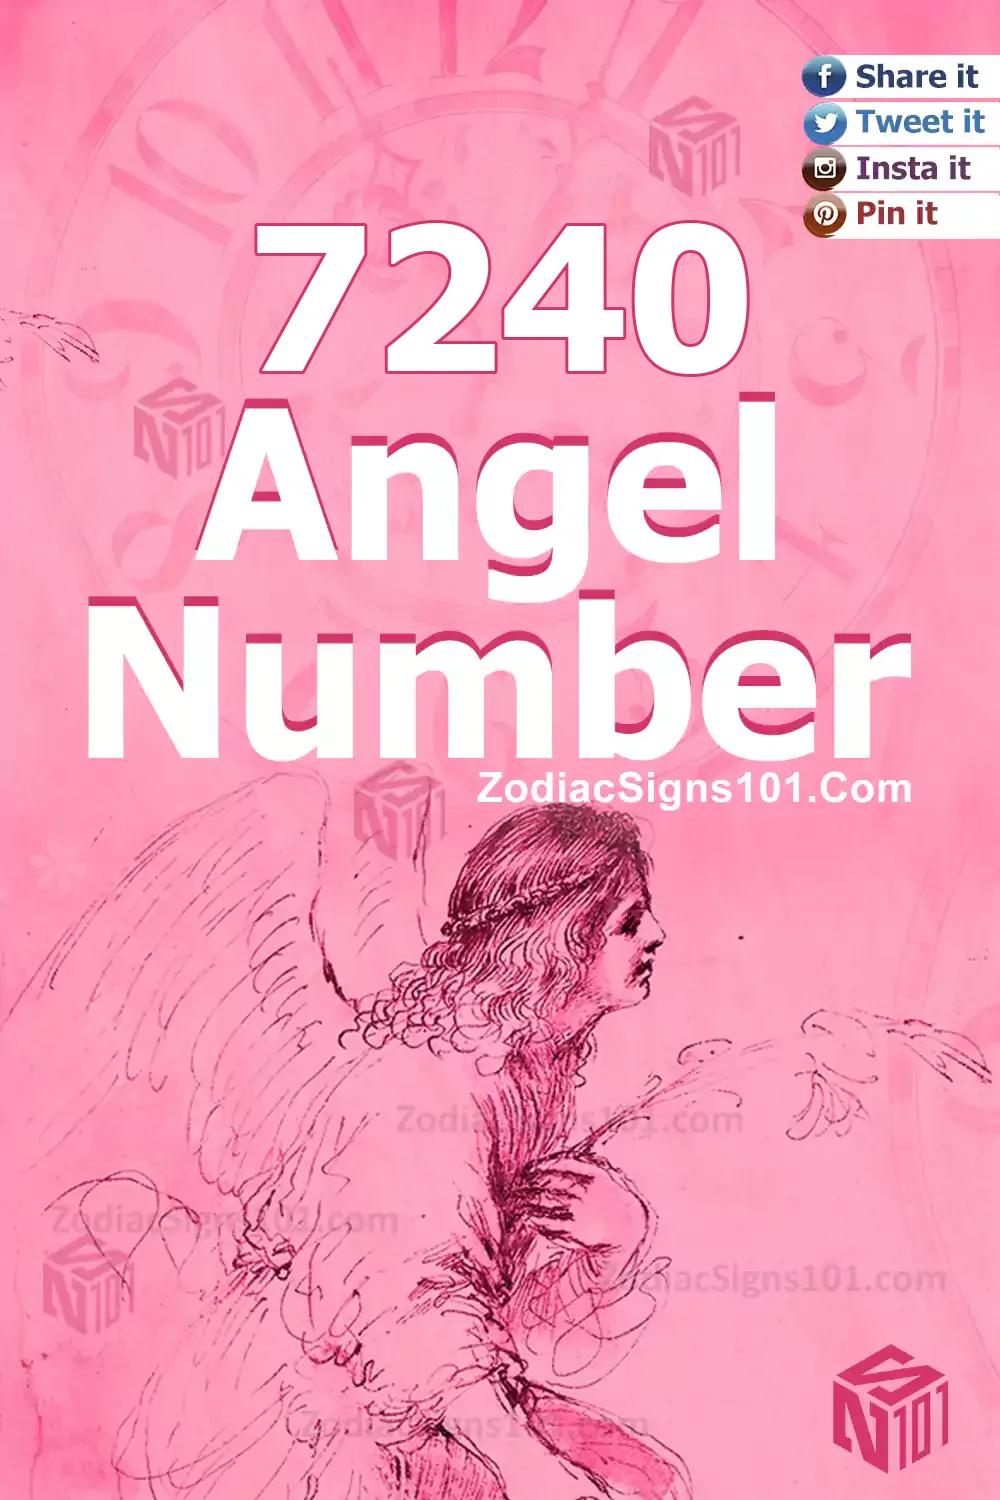 7240 Angel Number Meaning